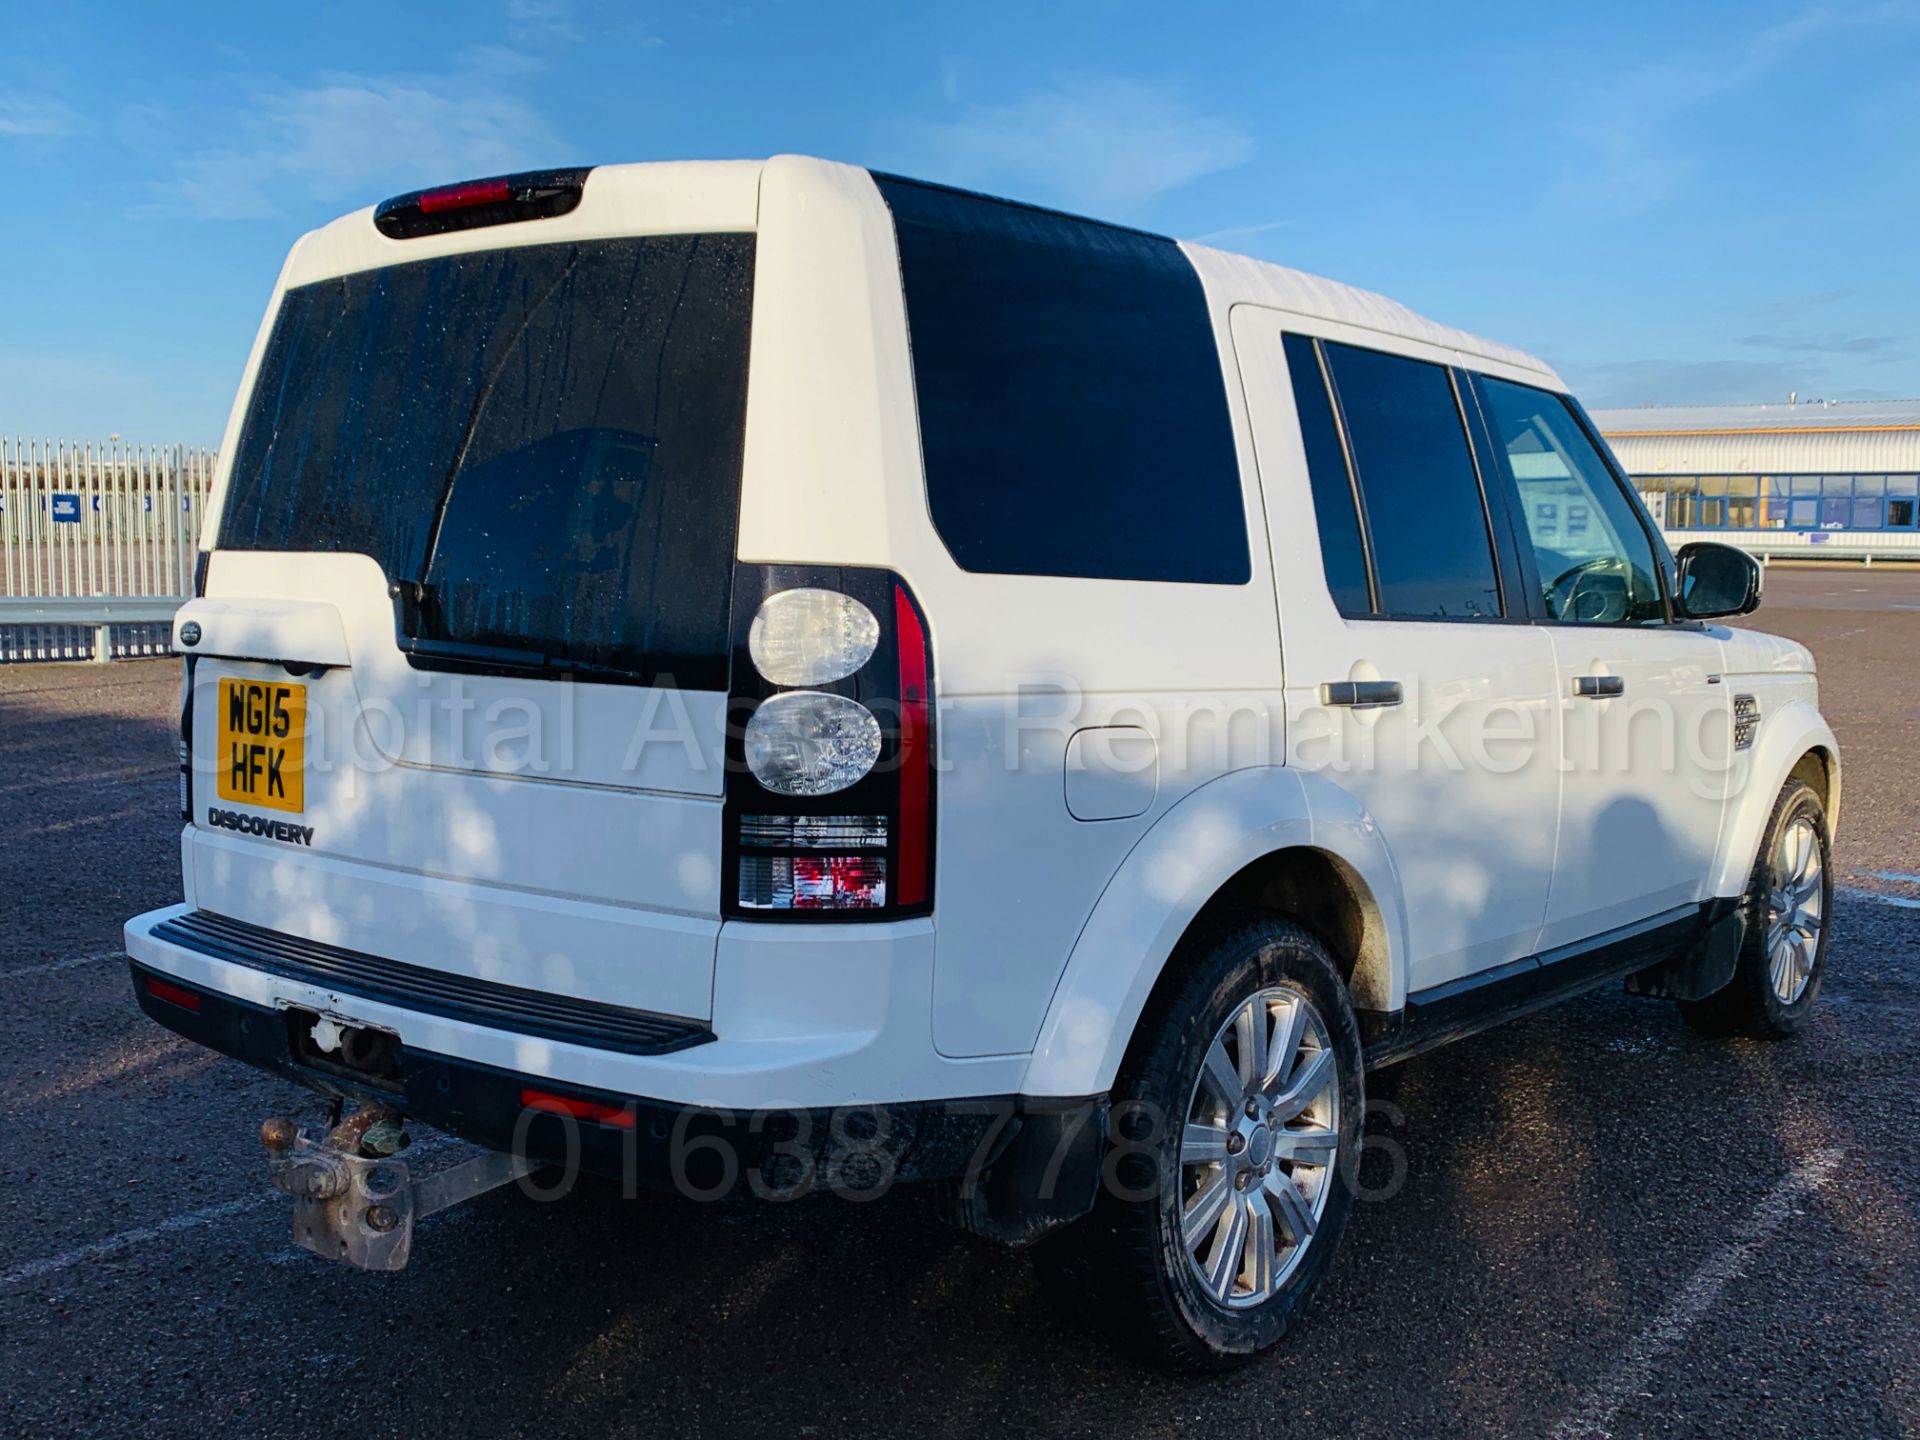 LAND ROVER DISCOVERY 4 *XS EDITION* (2015) '3.0 SDV6 - 8 SPEED AUTO' *LEATHER & SAT NAV* *HUGE SPEC* - Image 7 of 47